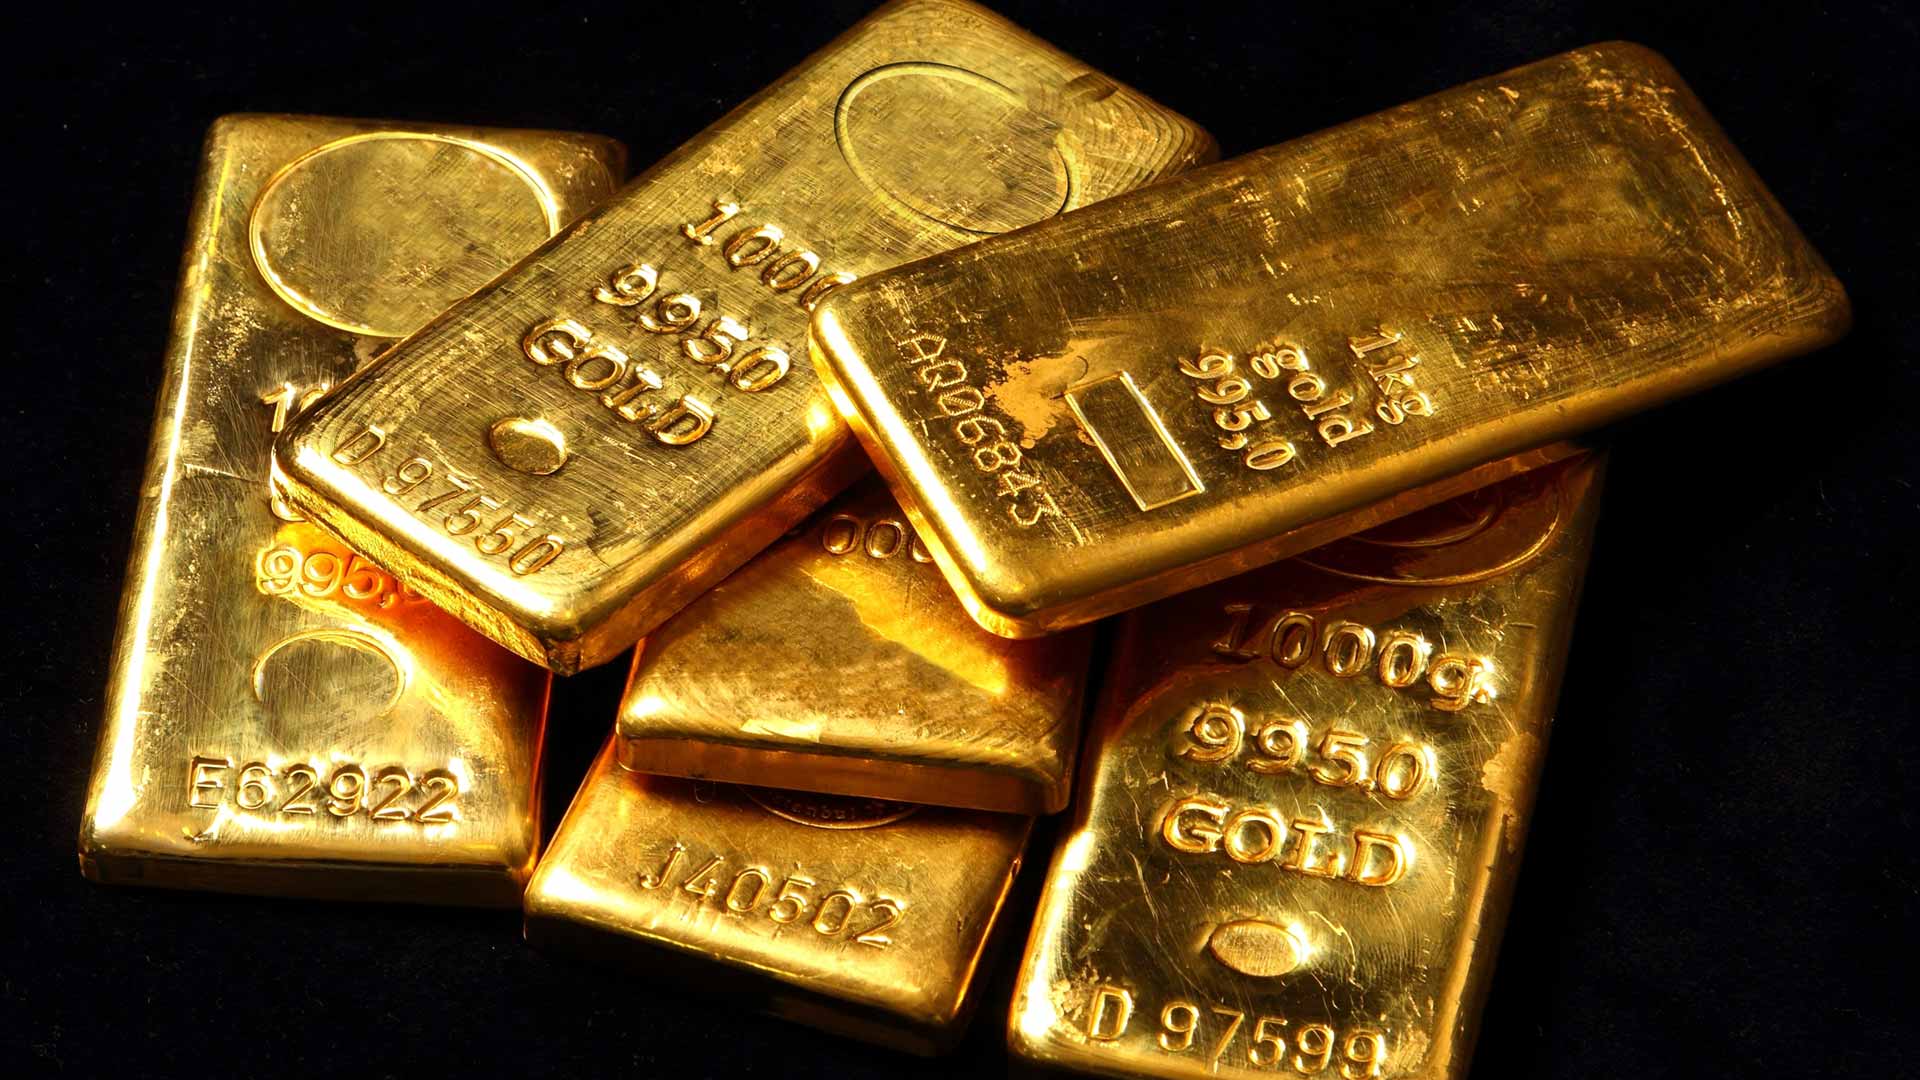 Real solid gold bars